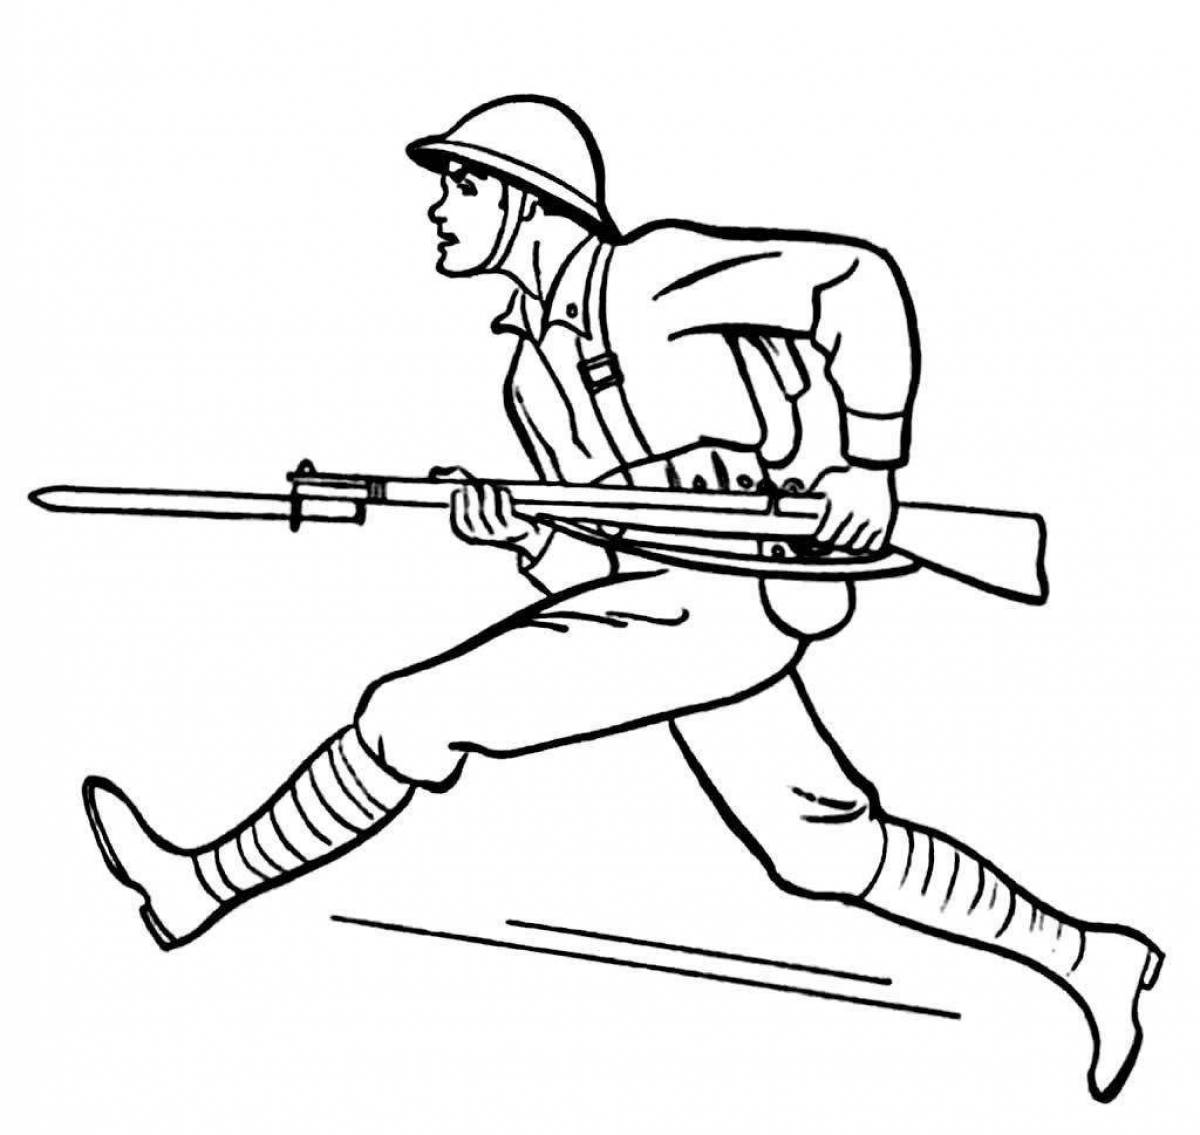 Glorious army coloring page